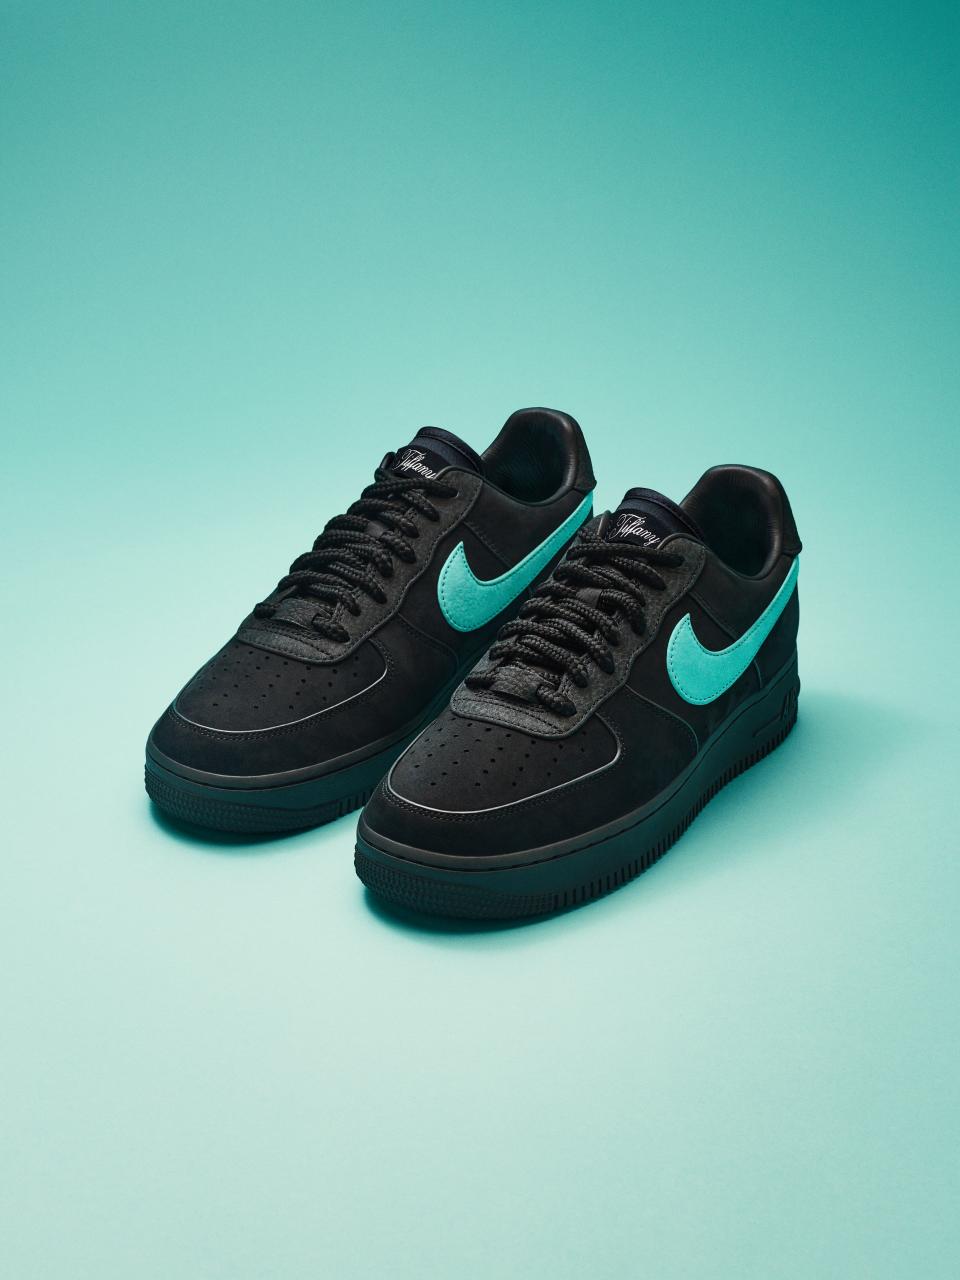 Nike and Tiffany released a new sneaker but social media thinks its "hideous."